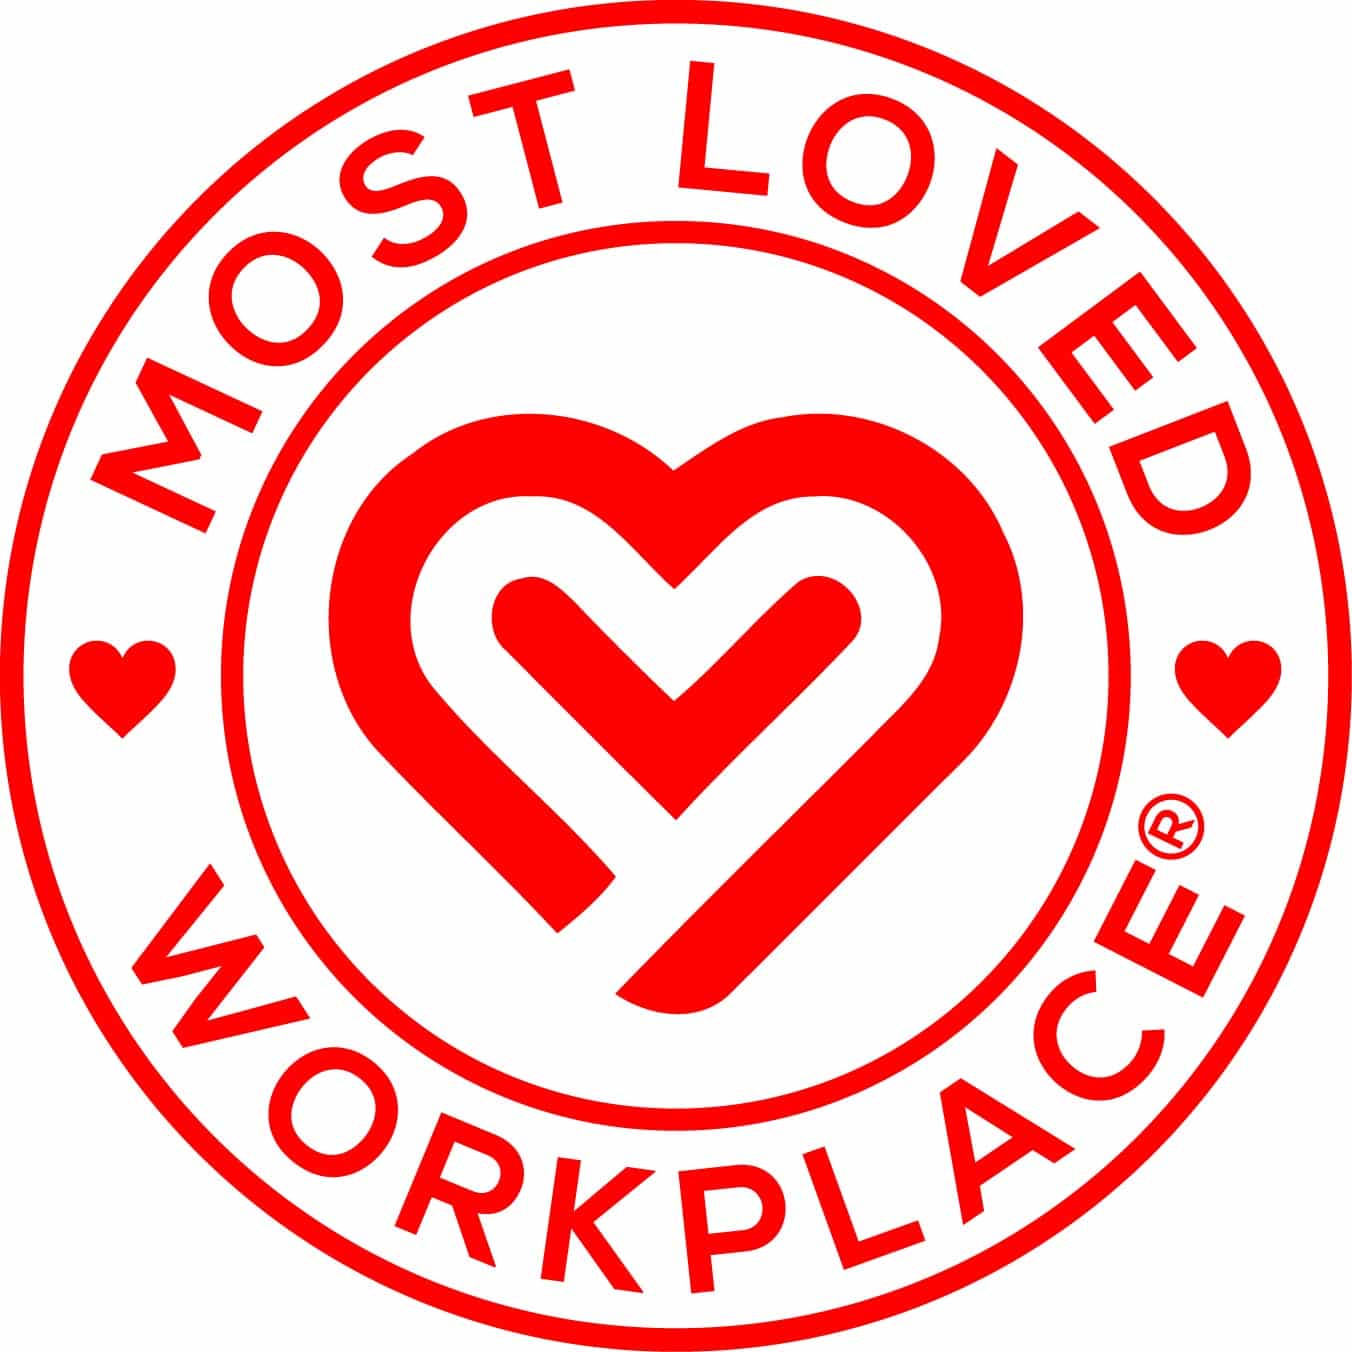 Level 1 - Certification Monthly - Most Loved Workplace®